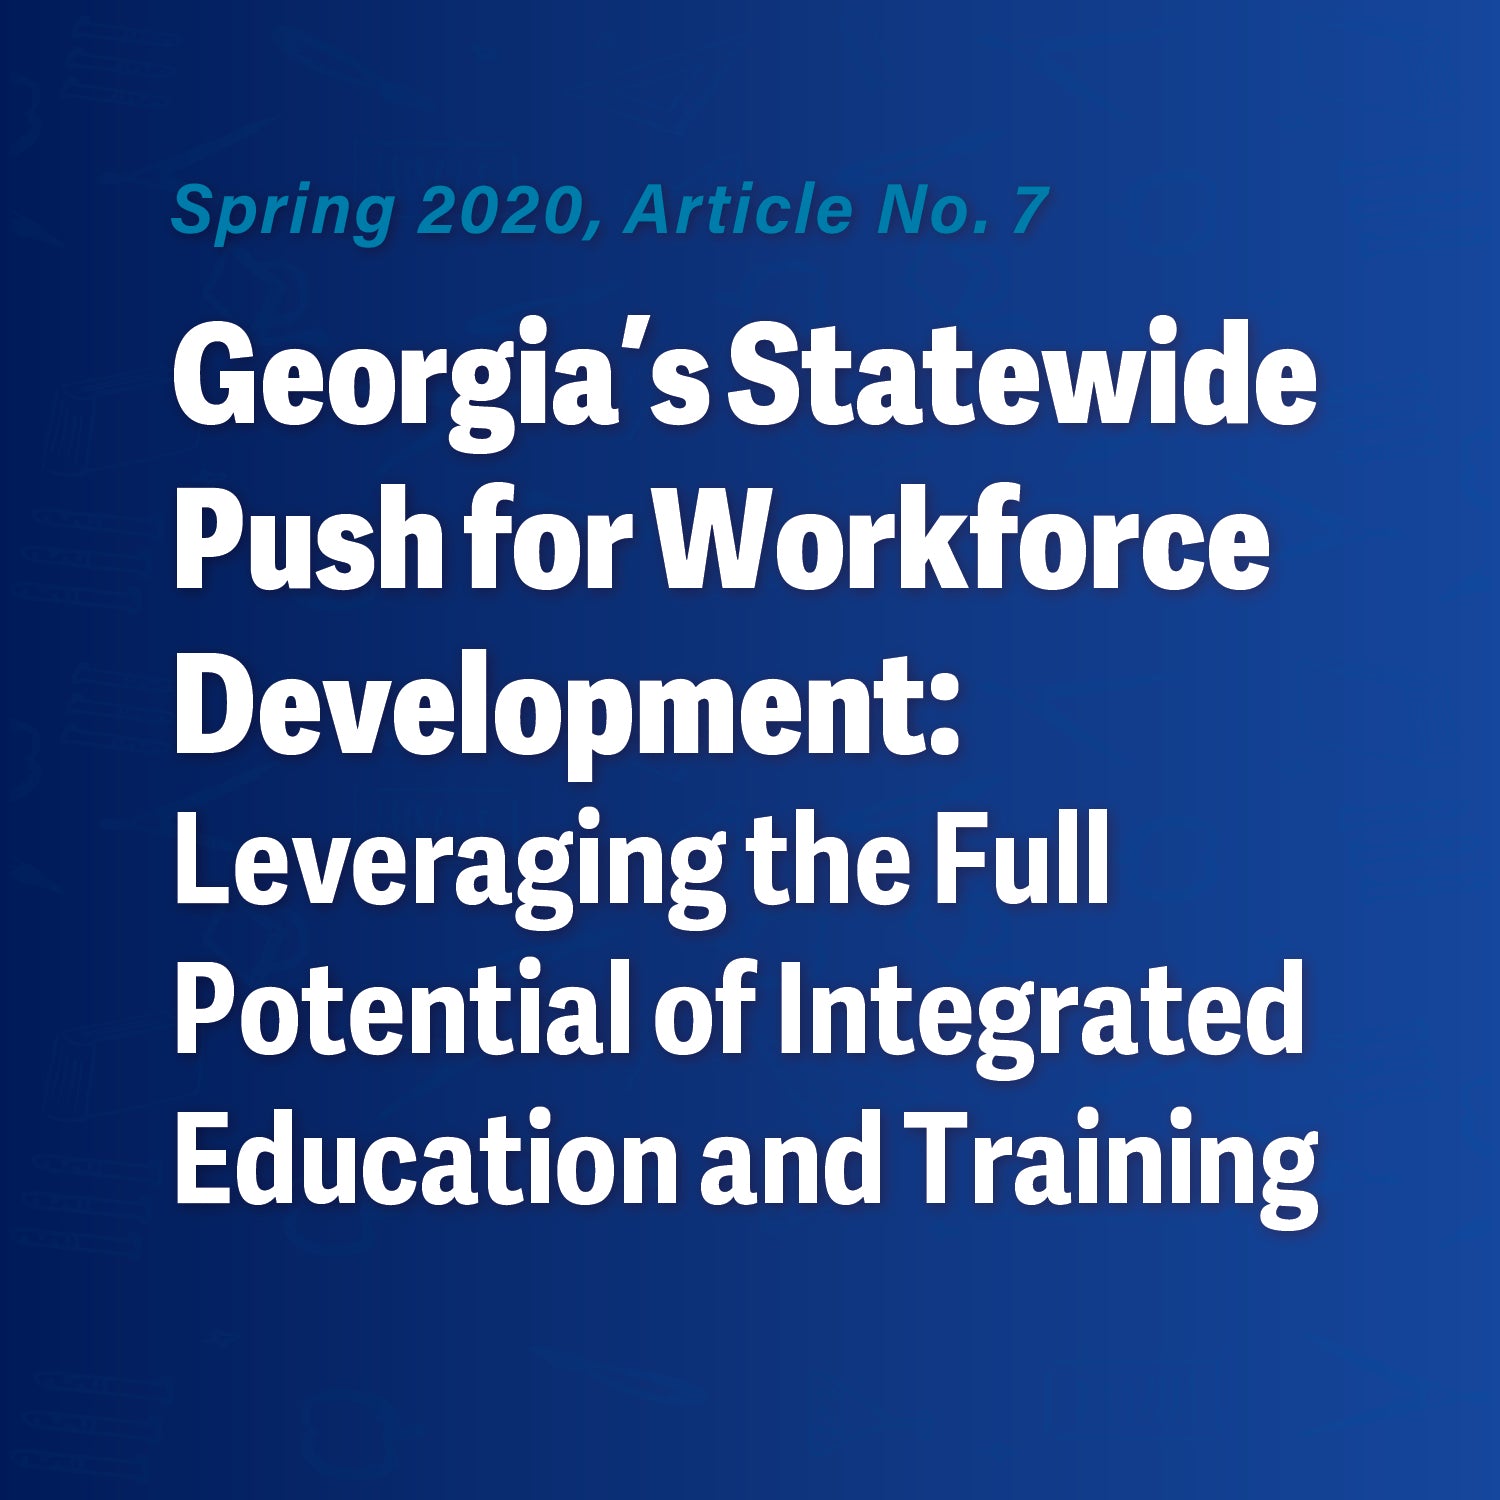 Georgia’s Statewide Push for Workforce Development Leveraging the Full Potential of Integrated Education and Training